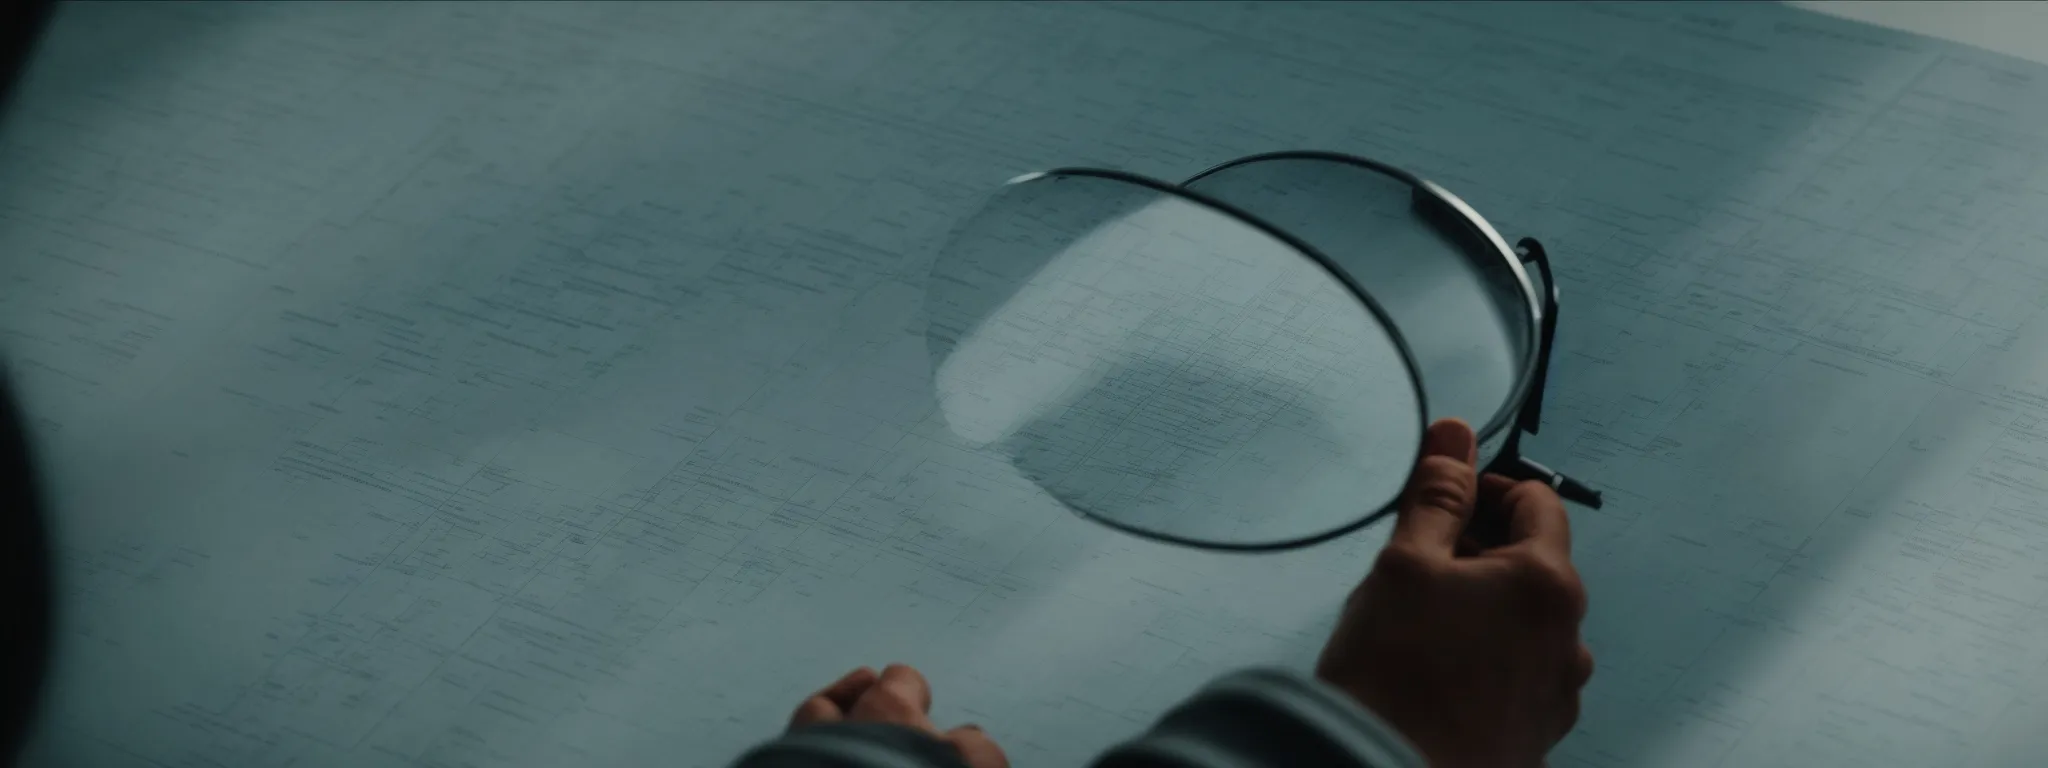 a person examining a detailed blueprint or a magnifying glass hovering over a web page layout.